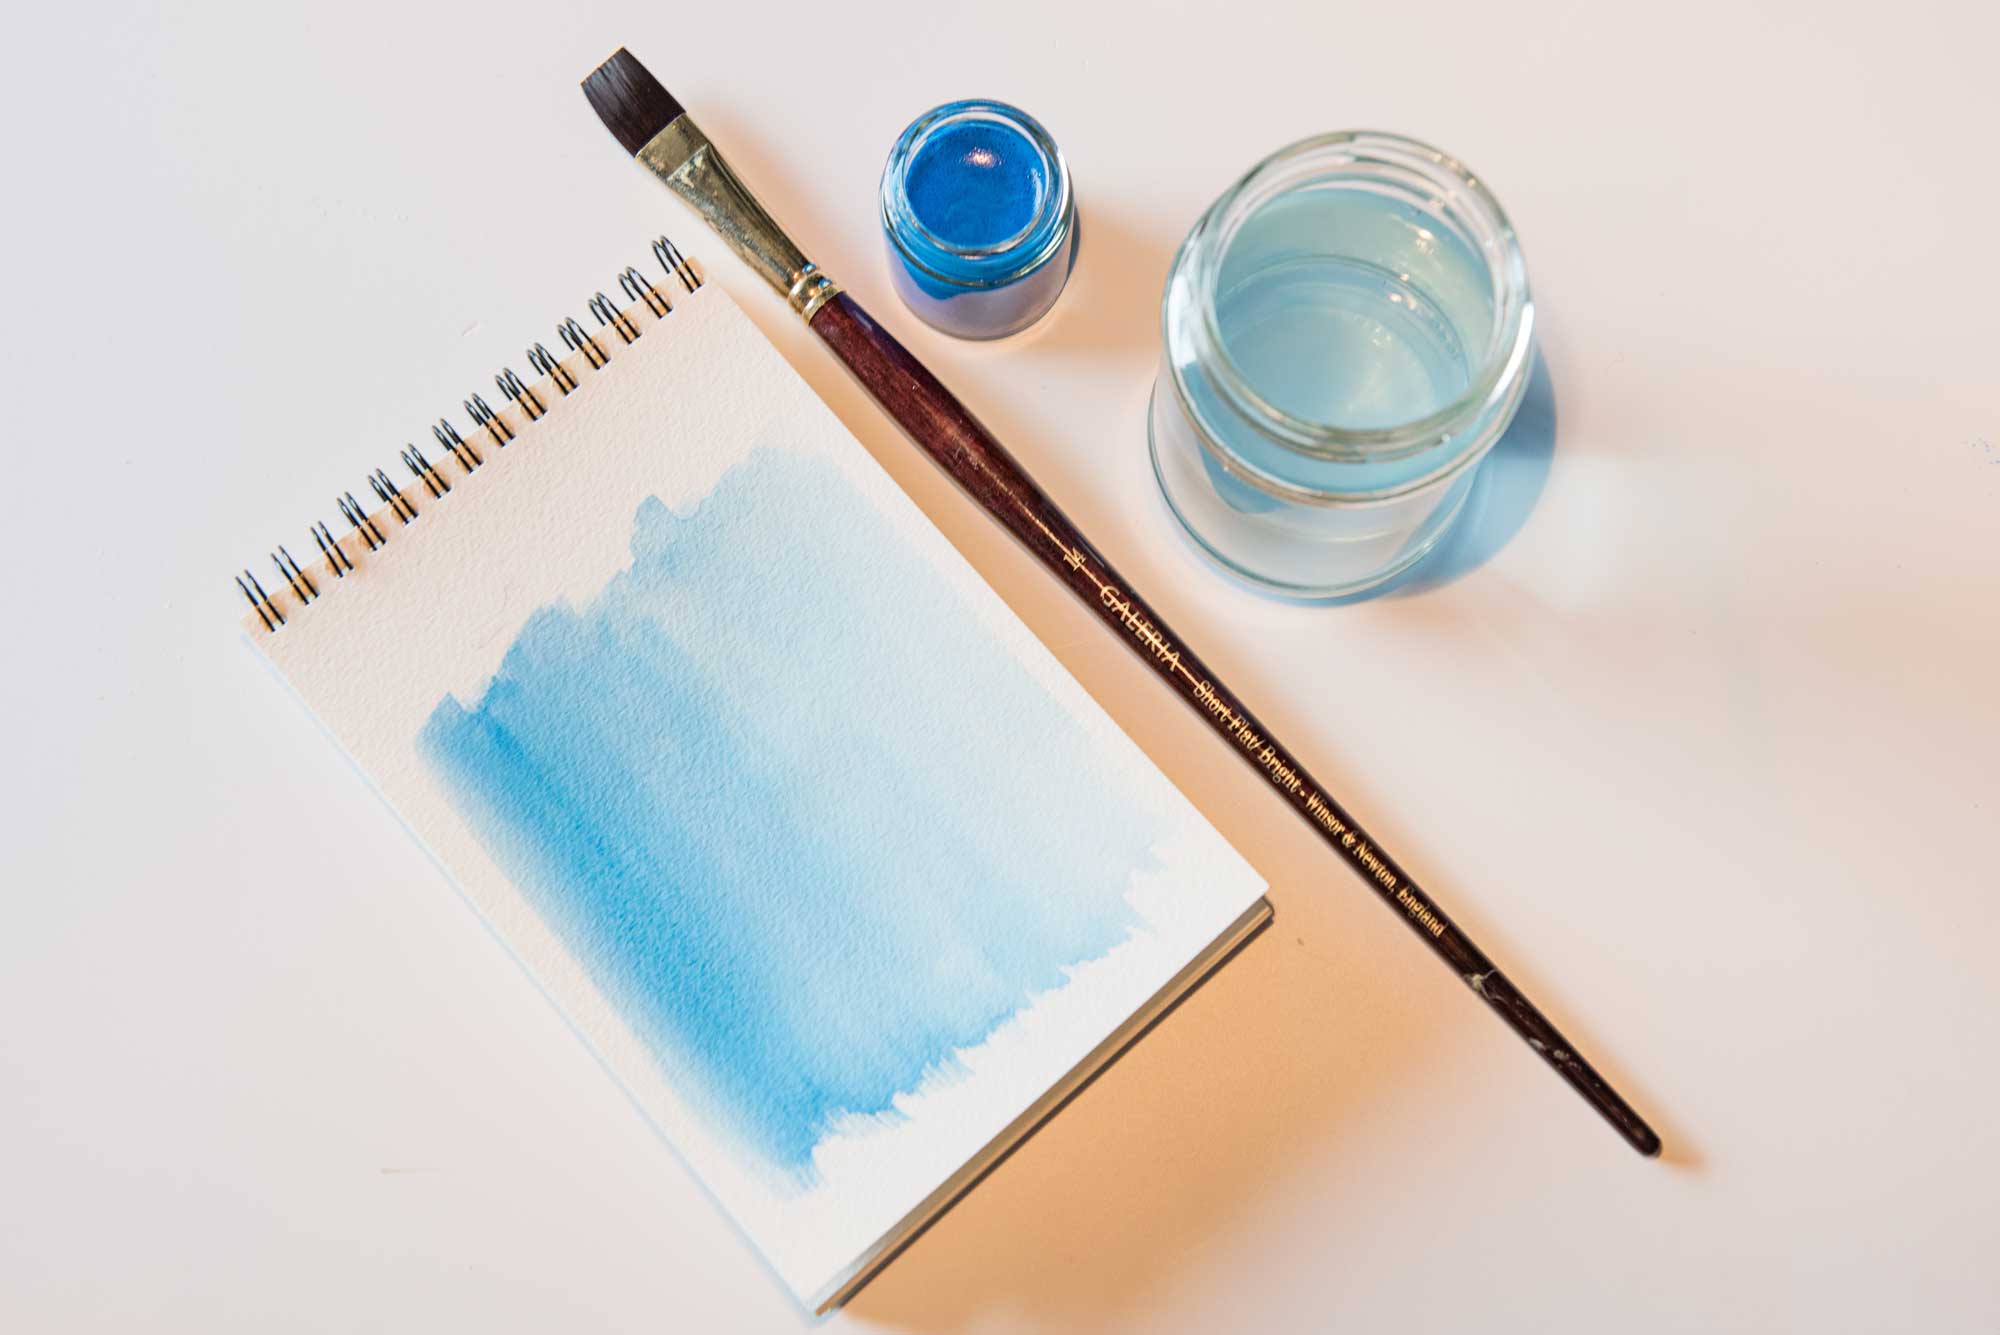 How to make your own WaterColour Paints